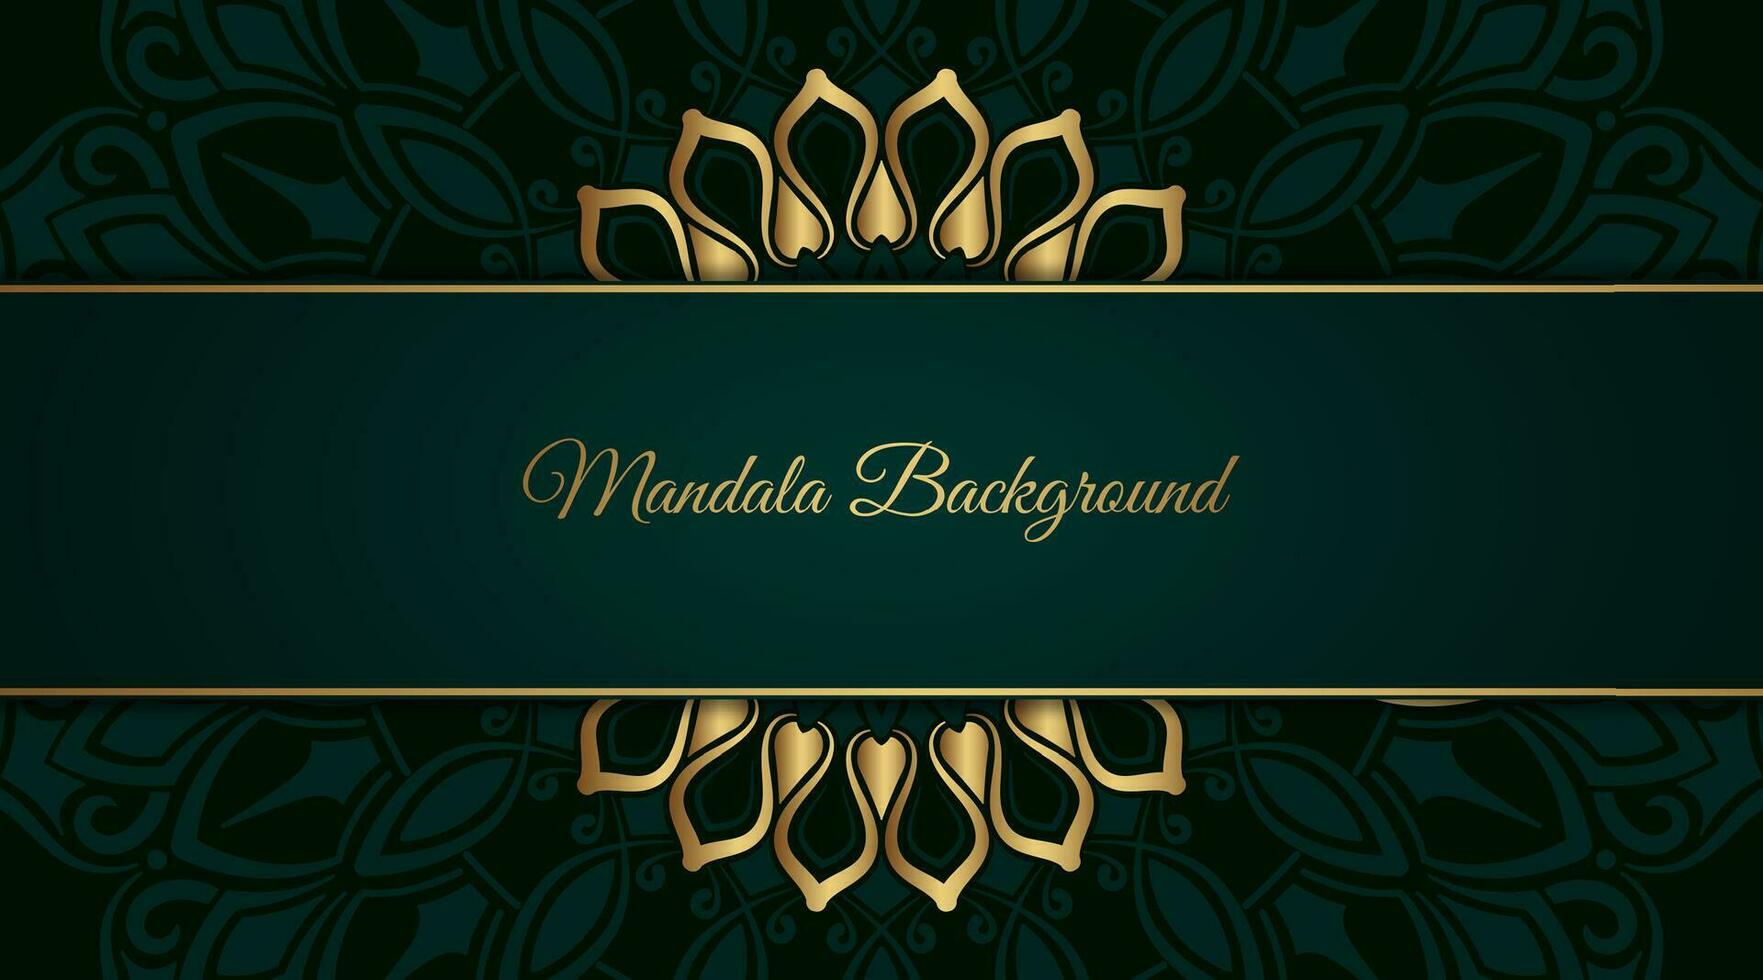 Luxury background  with mandala ornament vector